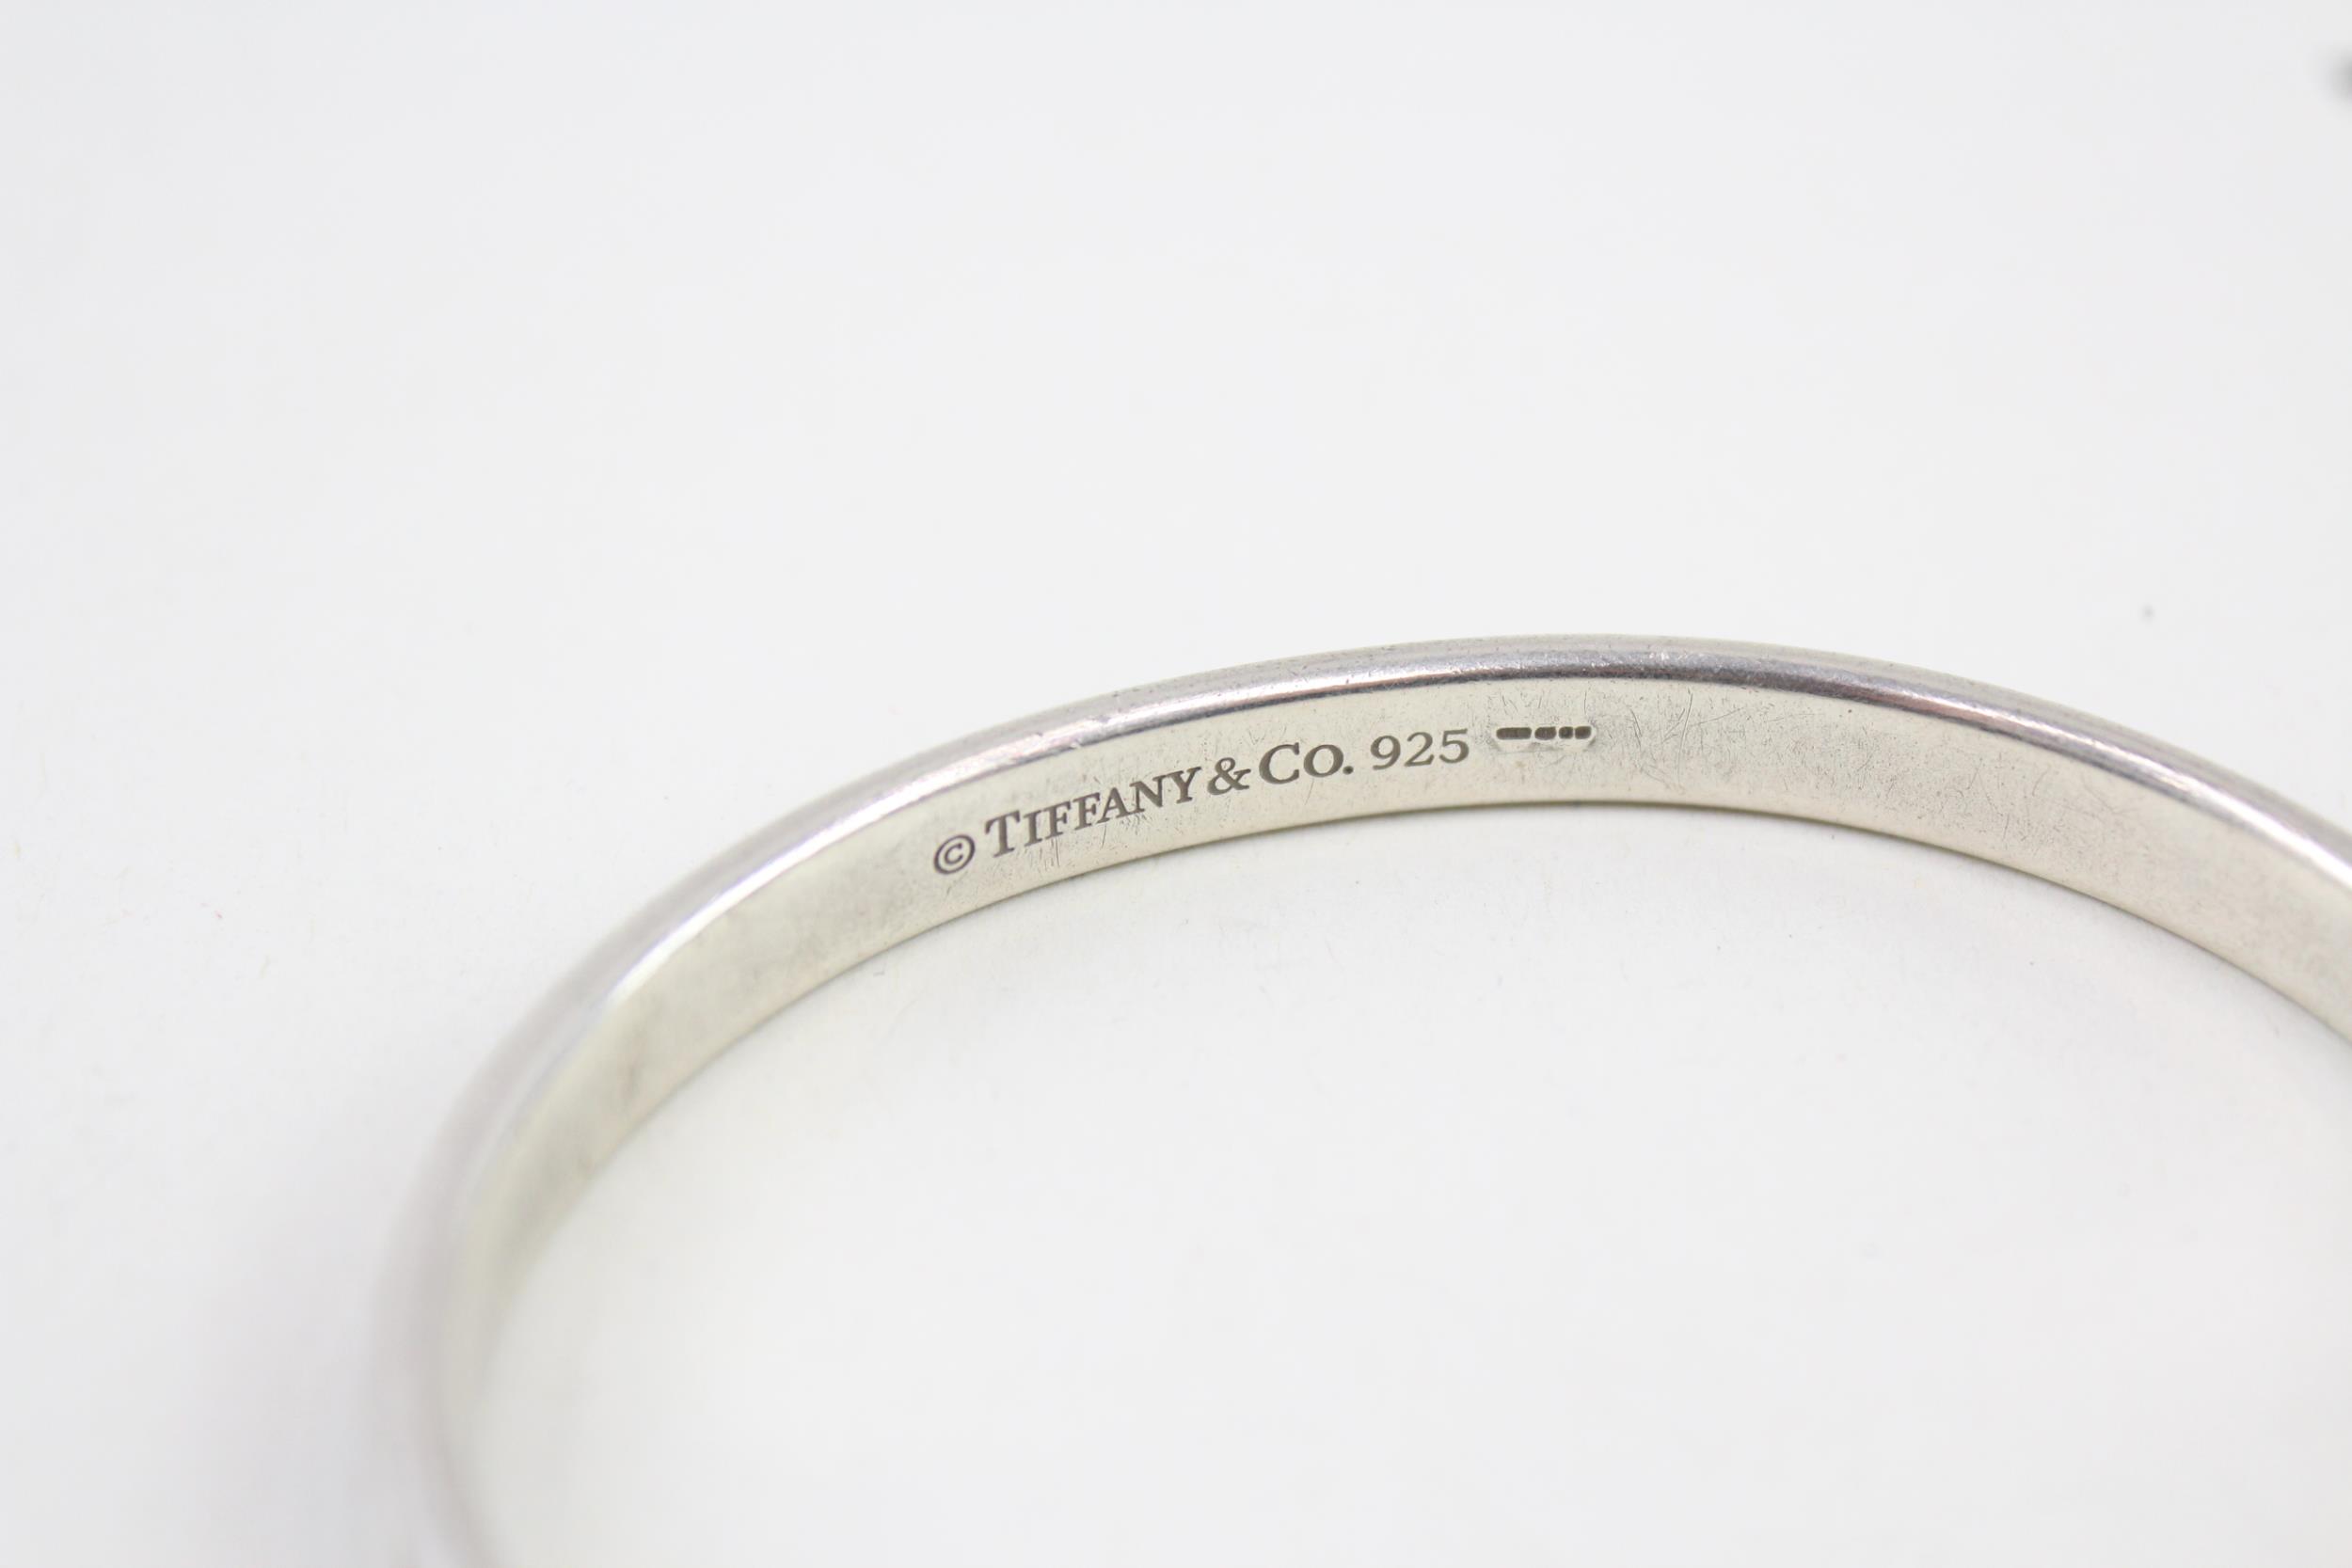 Silver bangle by designer Tiffany & Co (32g) - Image 11 of 12